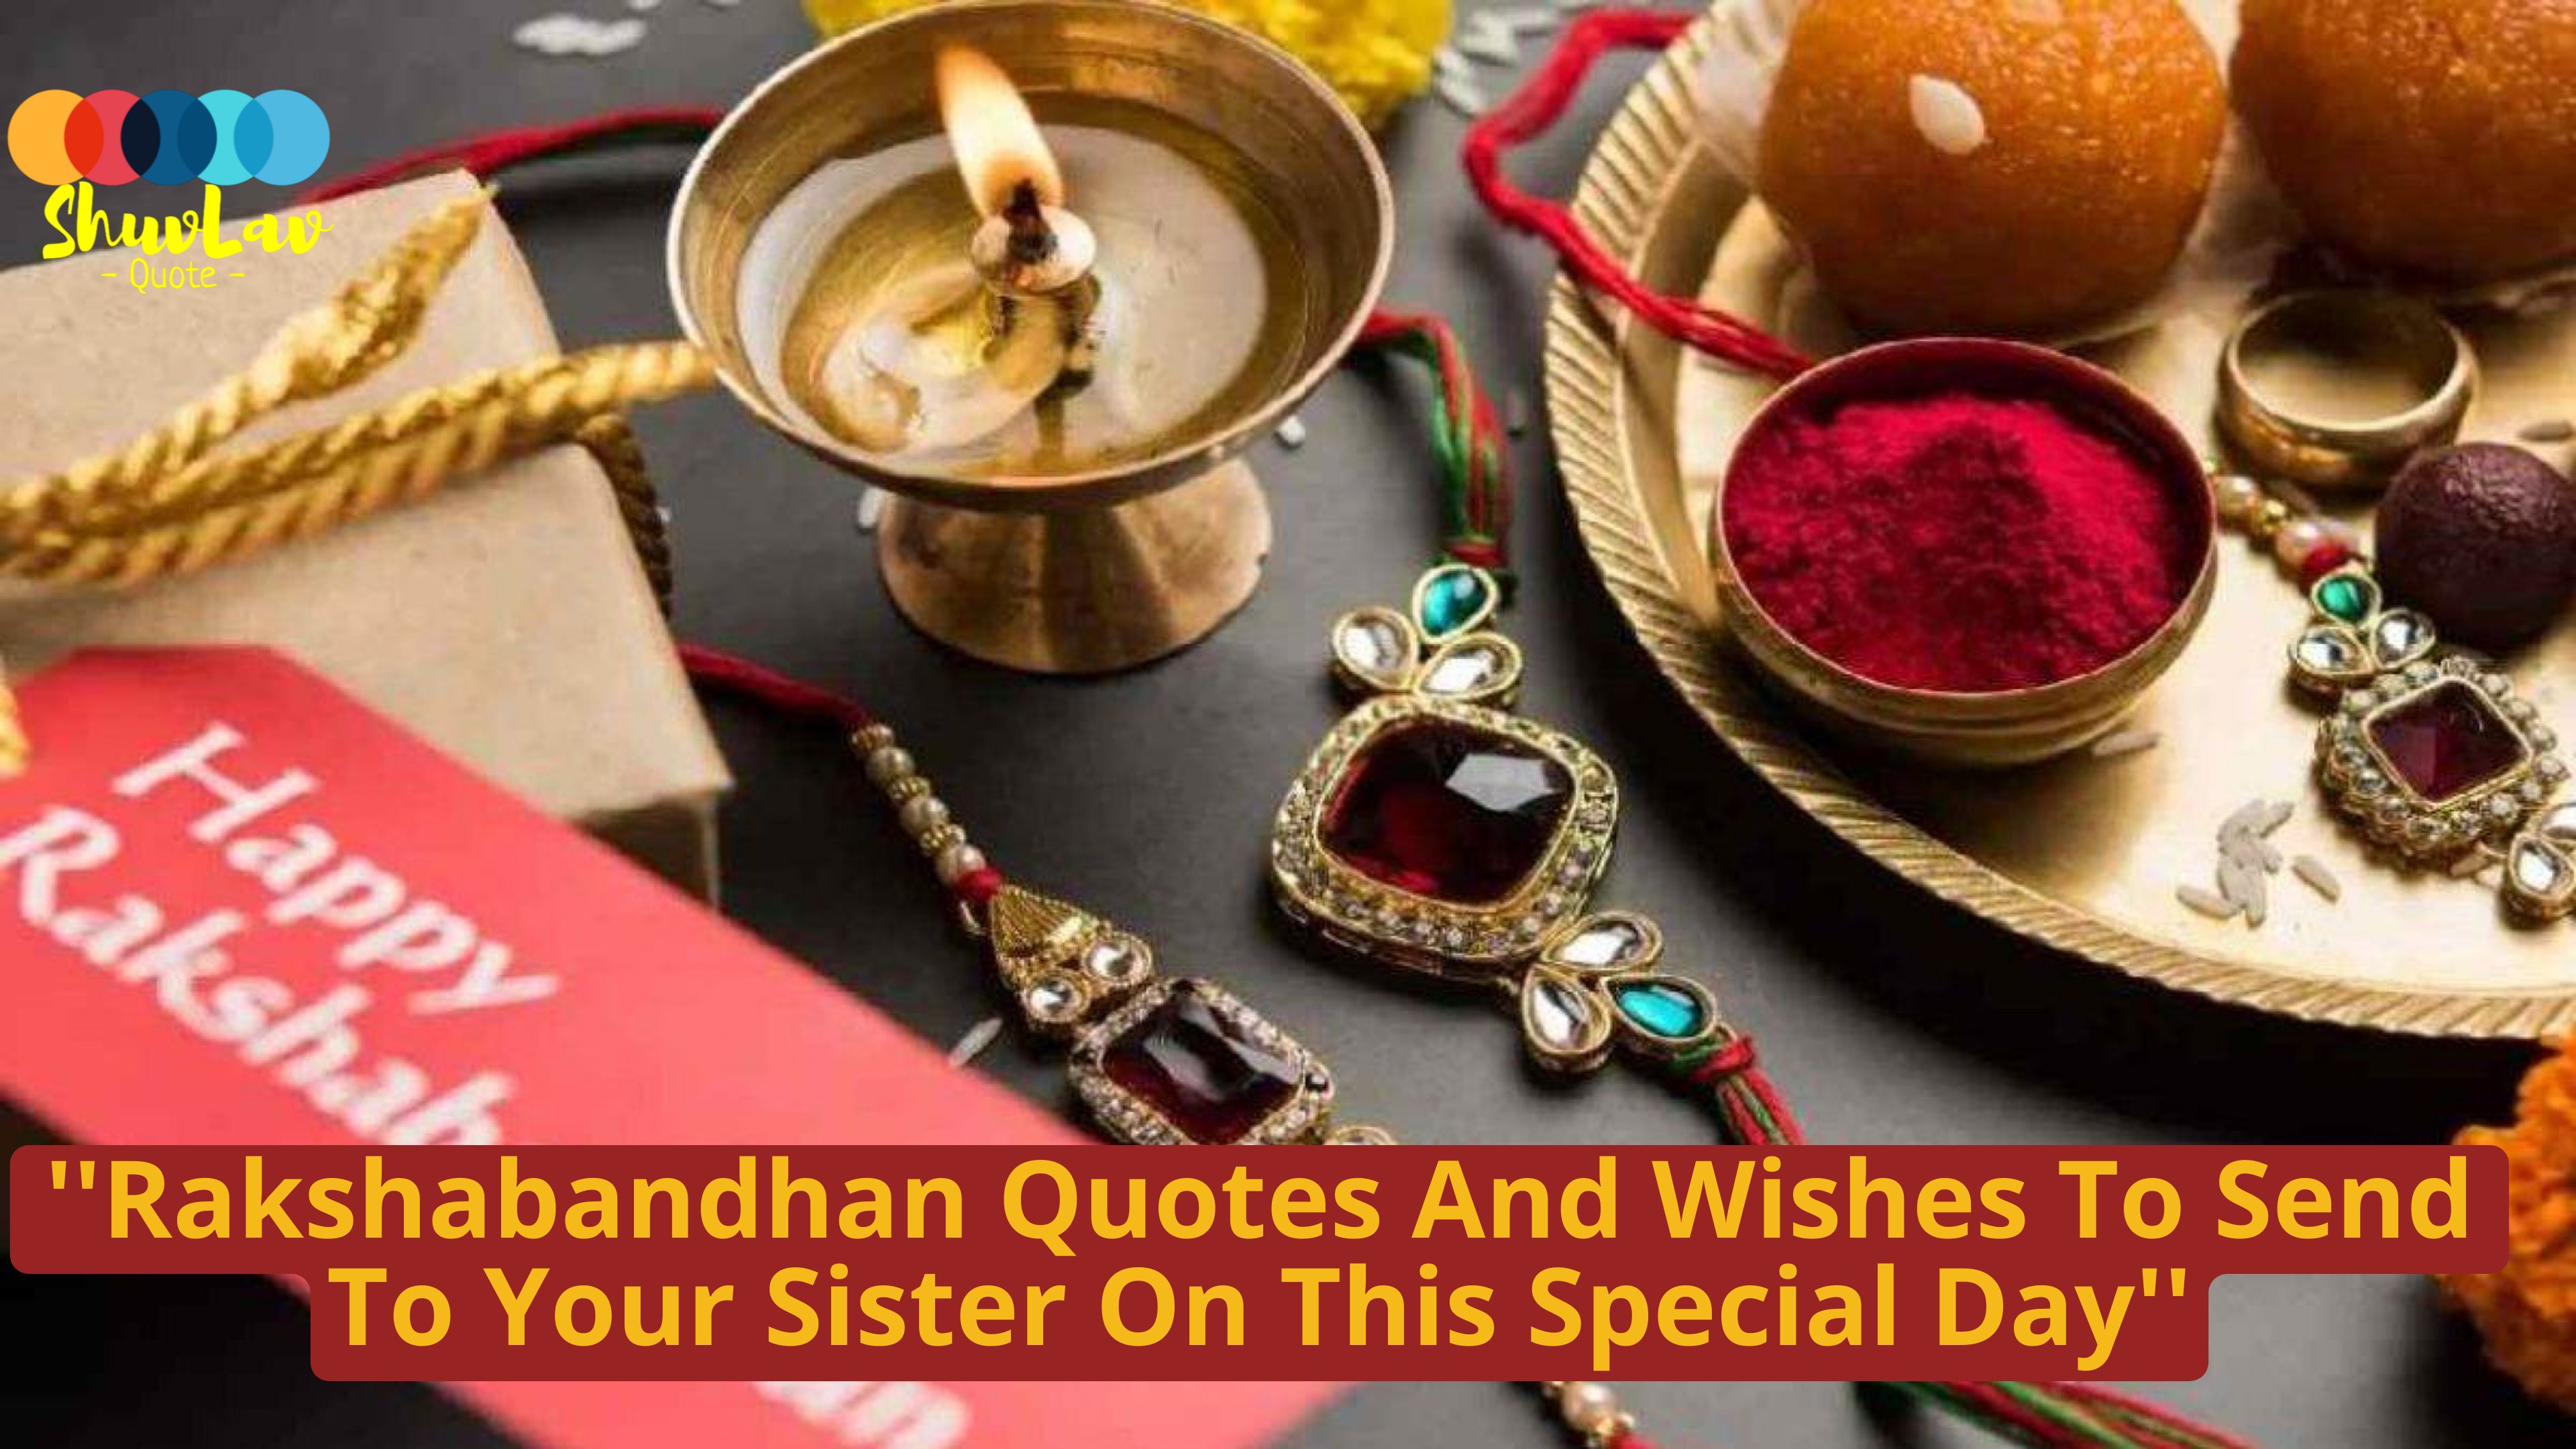 Rakshabandhan Quotes For Your Beloved Sister That Will Touch Her Heart